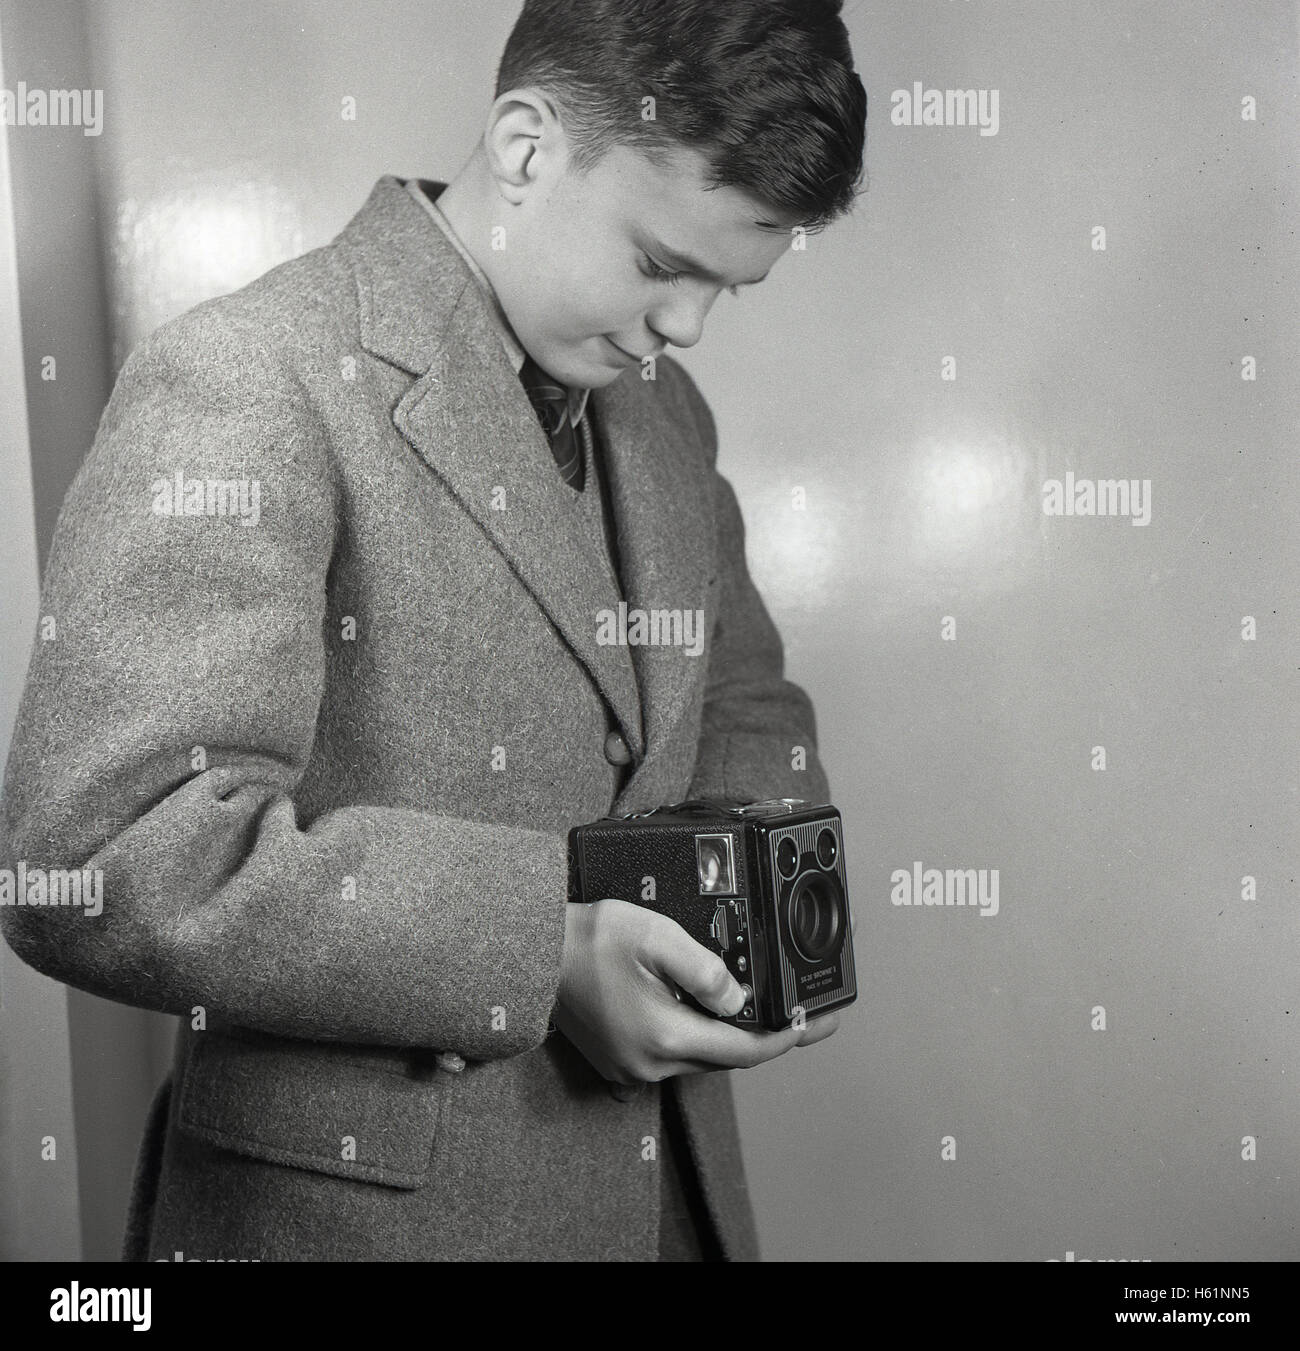 Early 1950s, historical, school boy standing taking a photograph at waist-level using a British made Six-20 'Brownie' E twin-lens reflex box film camera with two viewfinders. Stock Photo